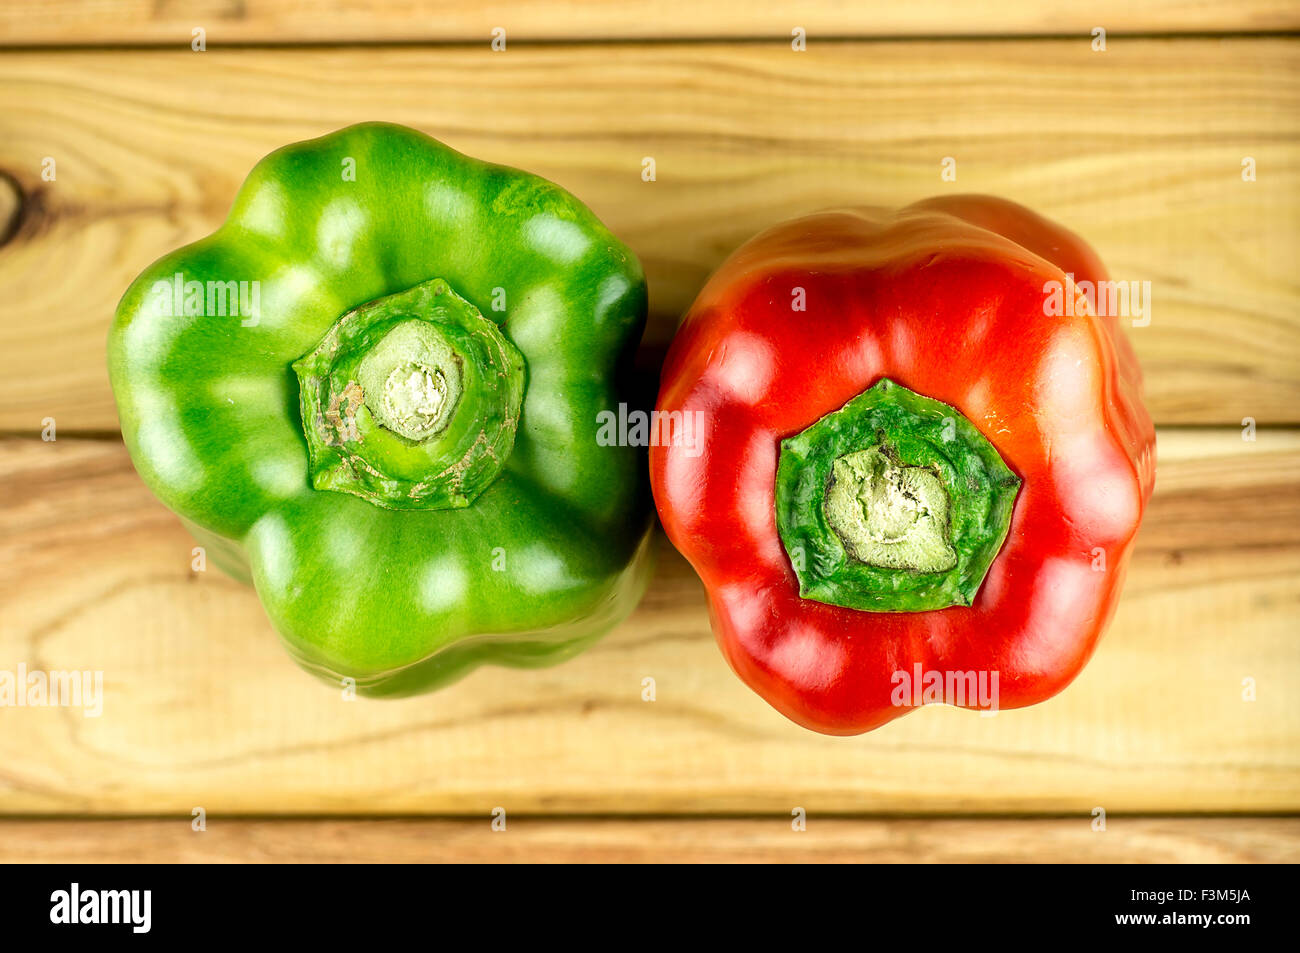 Aerial of green and red bell peppers on cutting board Stock Photo